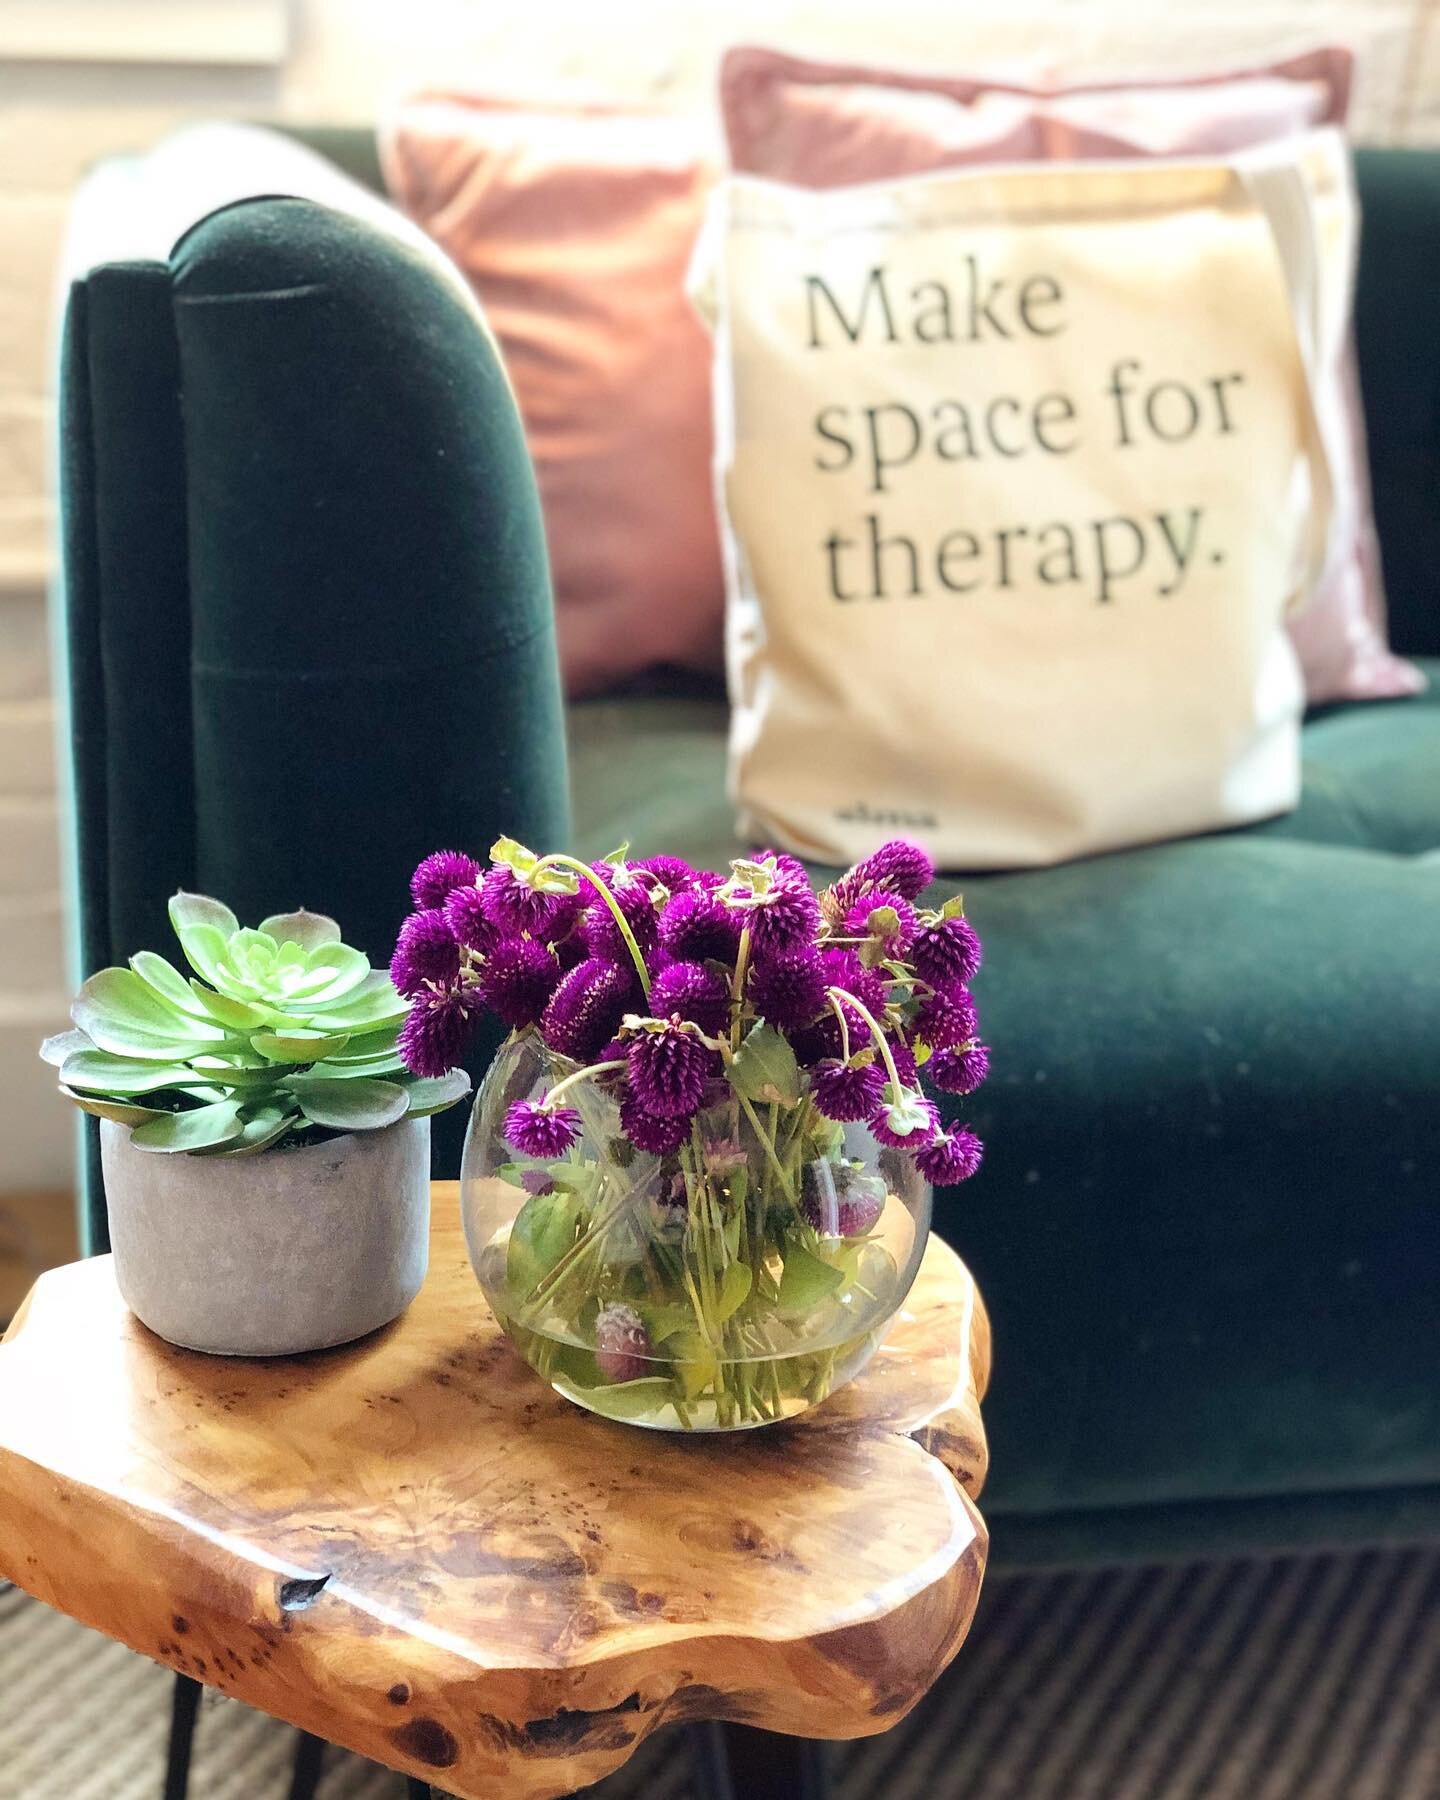 &ldquo;Make space for therapy.&rdquo; It can help you to navigate through all kinds of feelings, better equipping you to manage future obstacles. The therapeutic process can be a path to strengthen your skills in order to continue to grow!